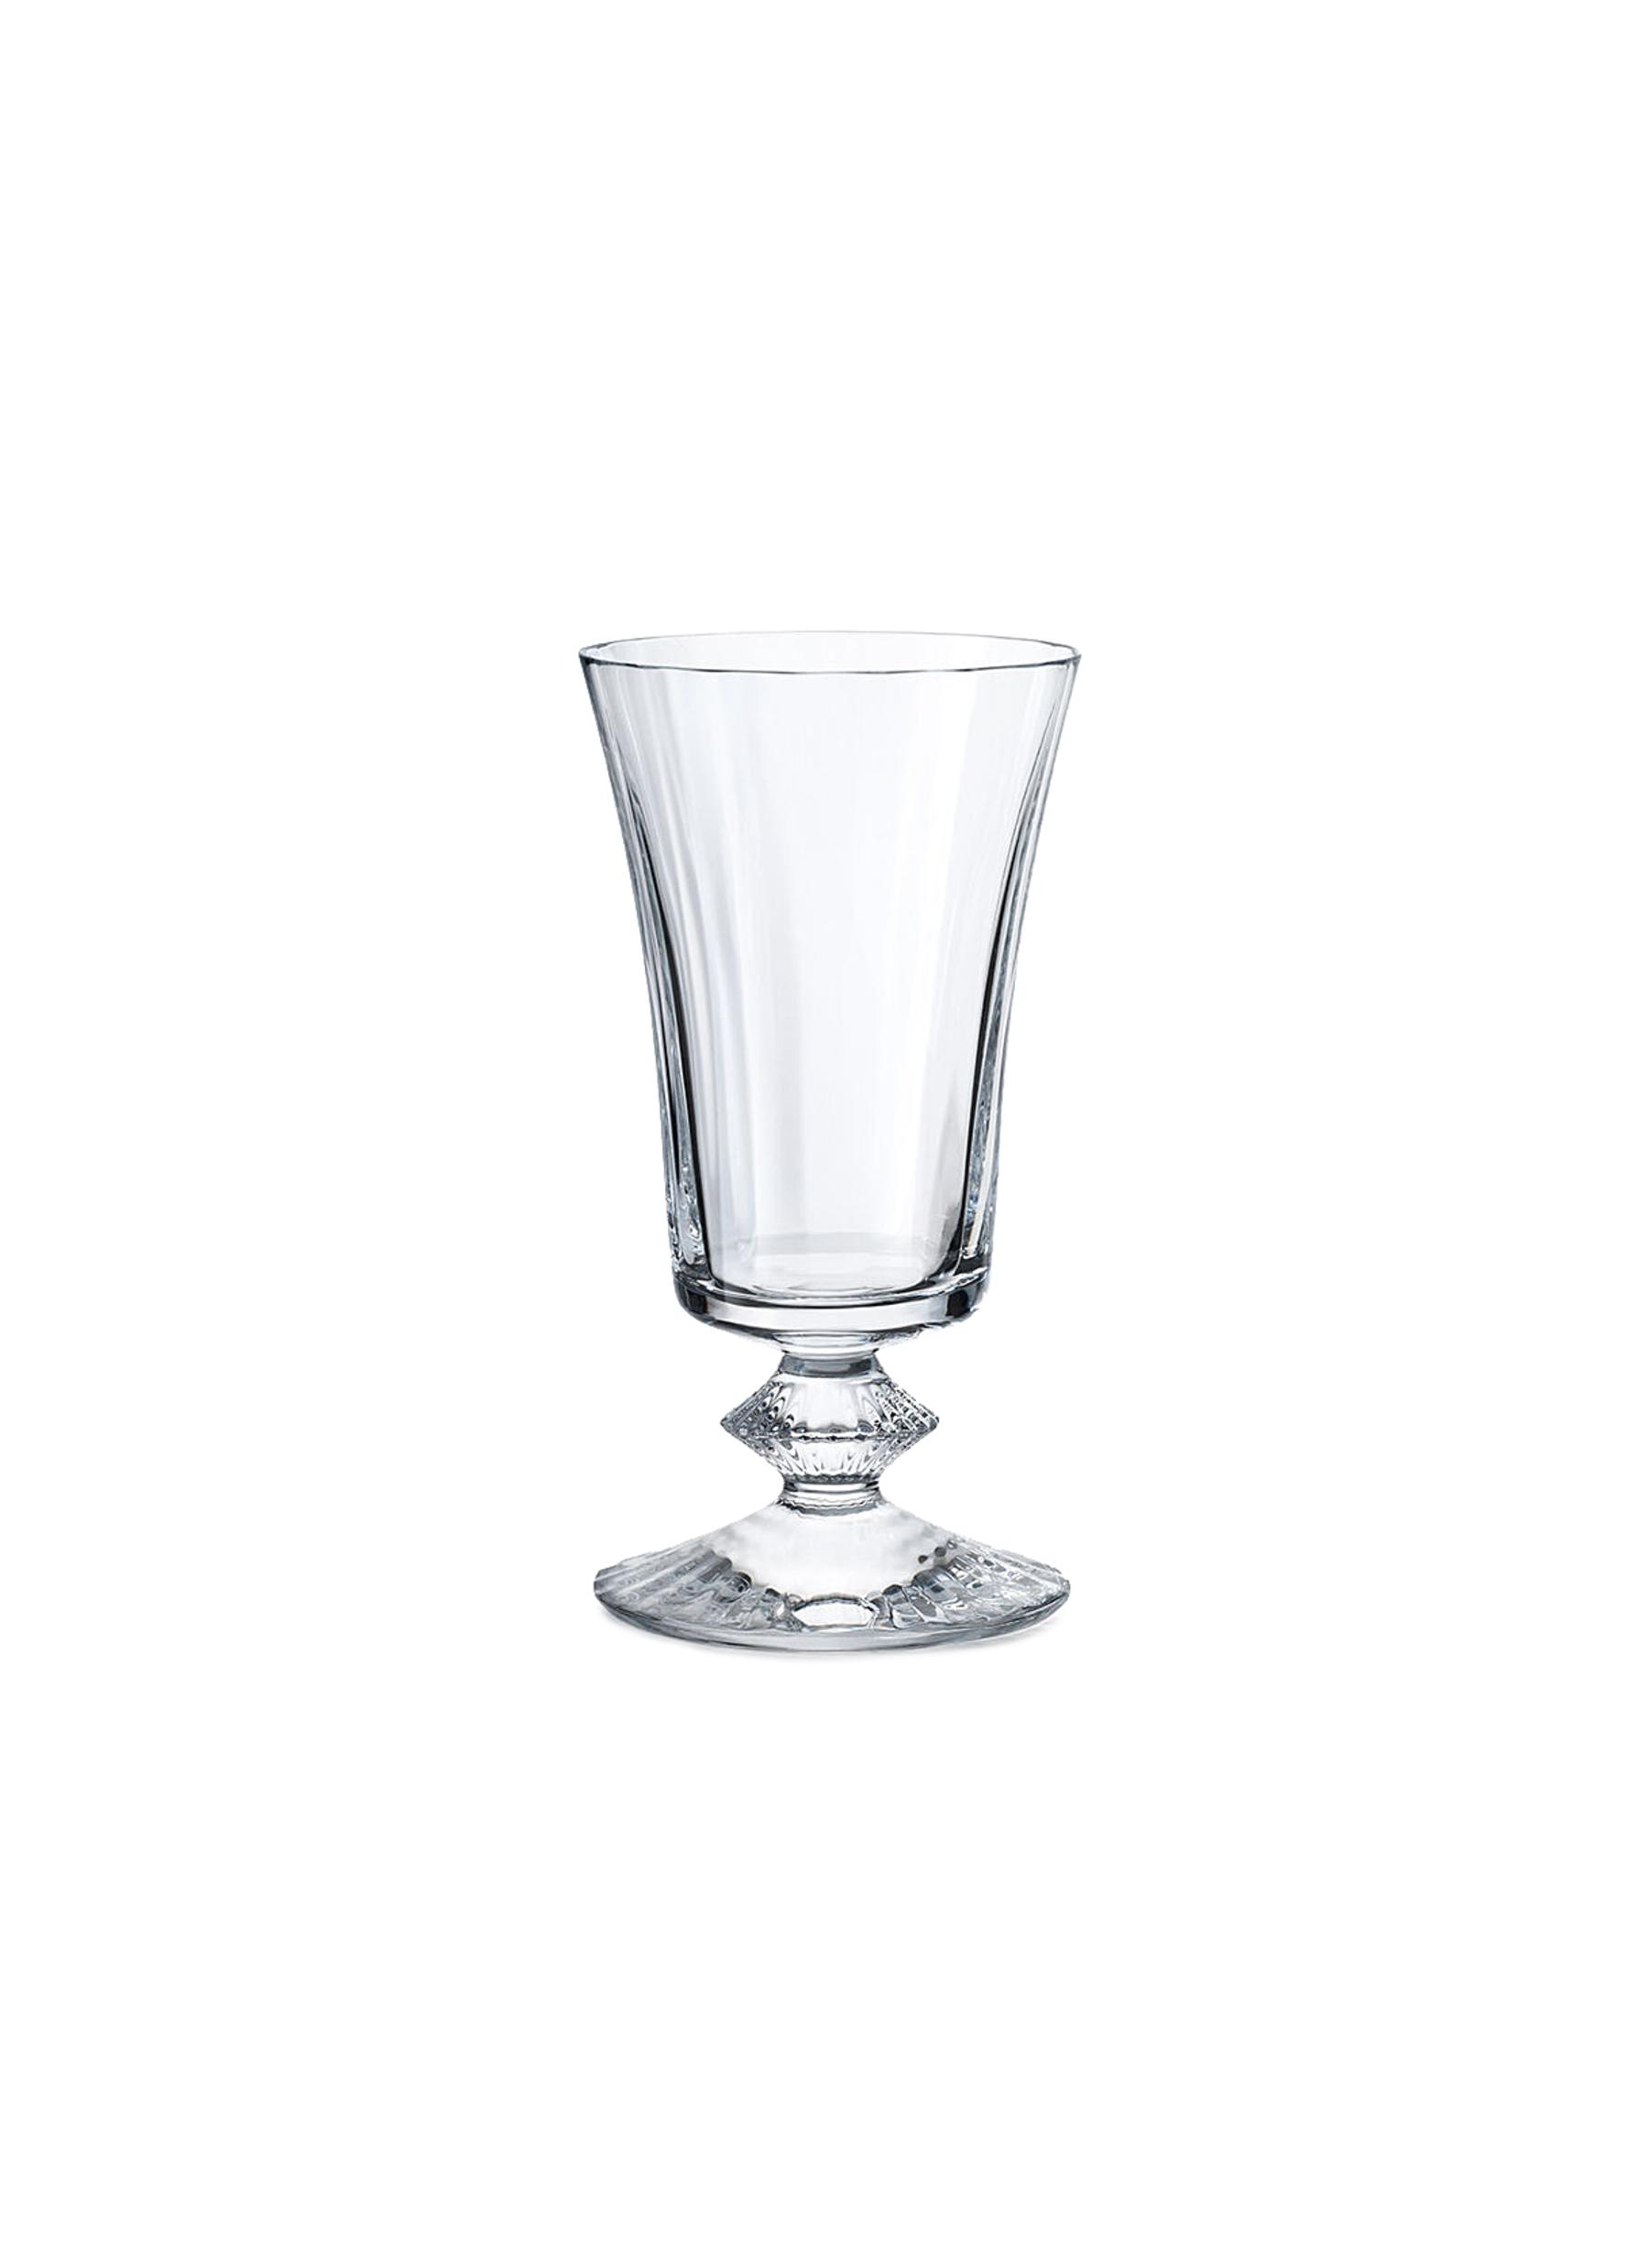 BACCARAT SMALL MILLE NUITS GLASS - CLEAR